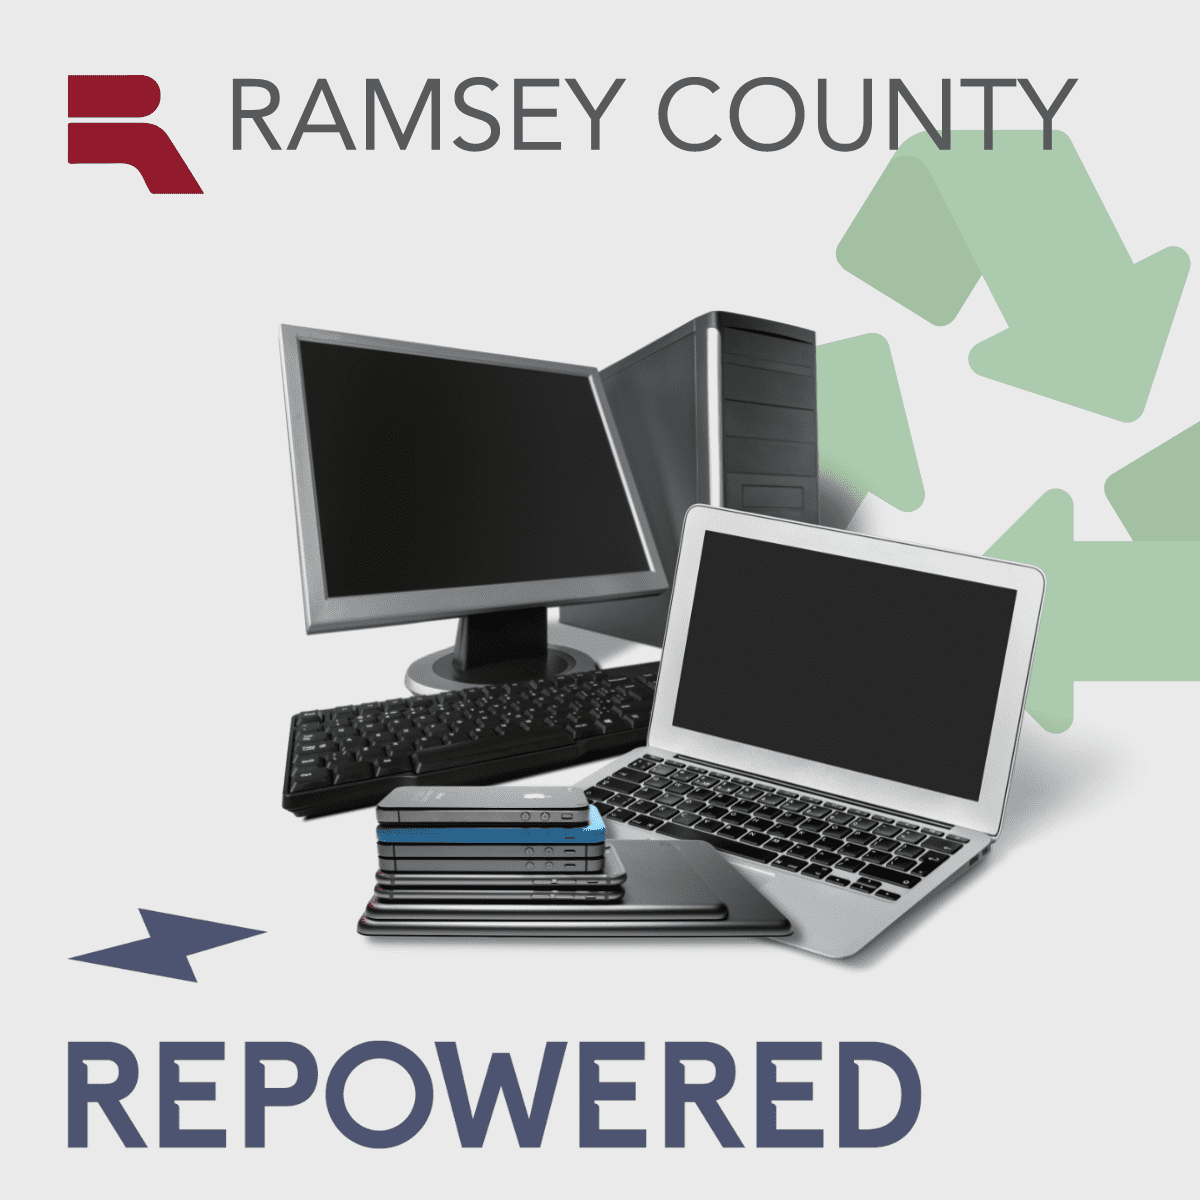 PIONEER PRESS | Ramsey County residents can now recycle electronics for free